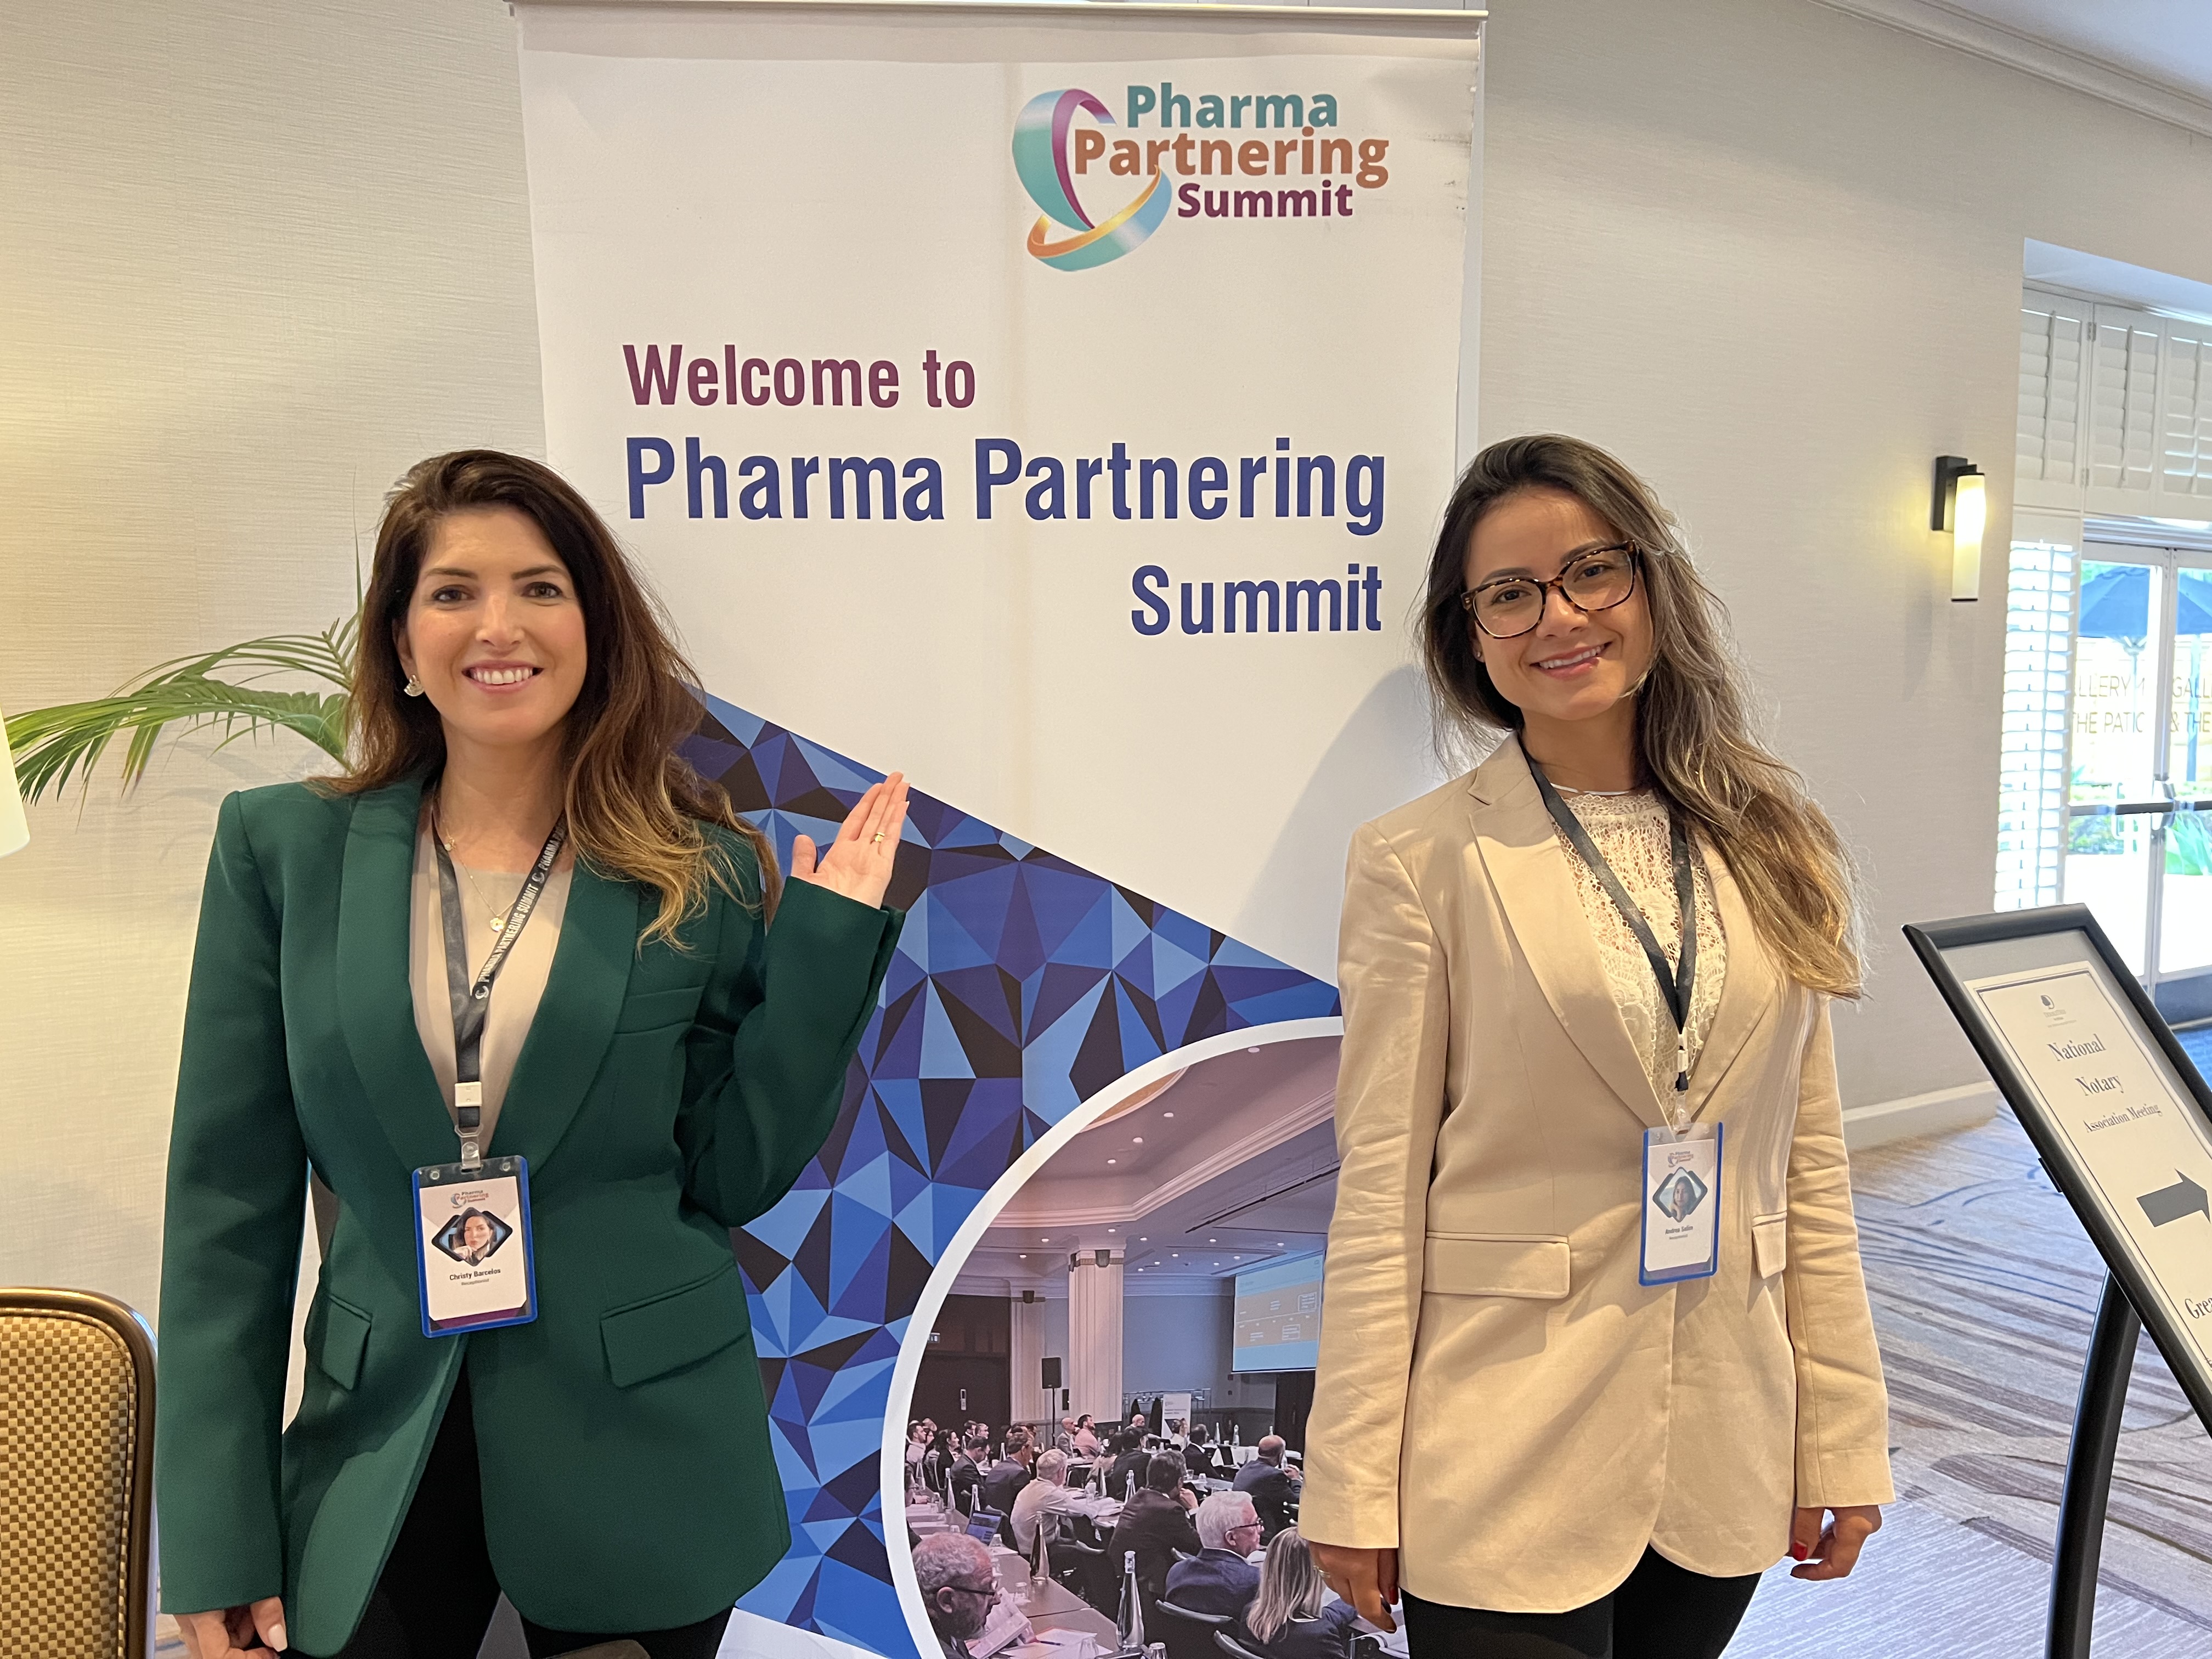 Pharma licensing and investor conference